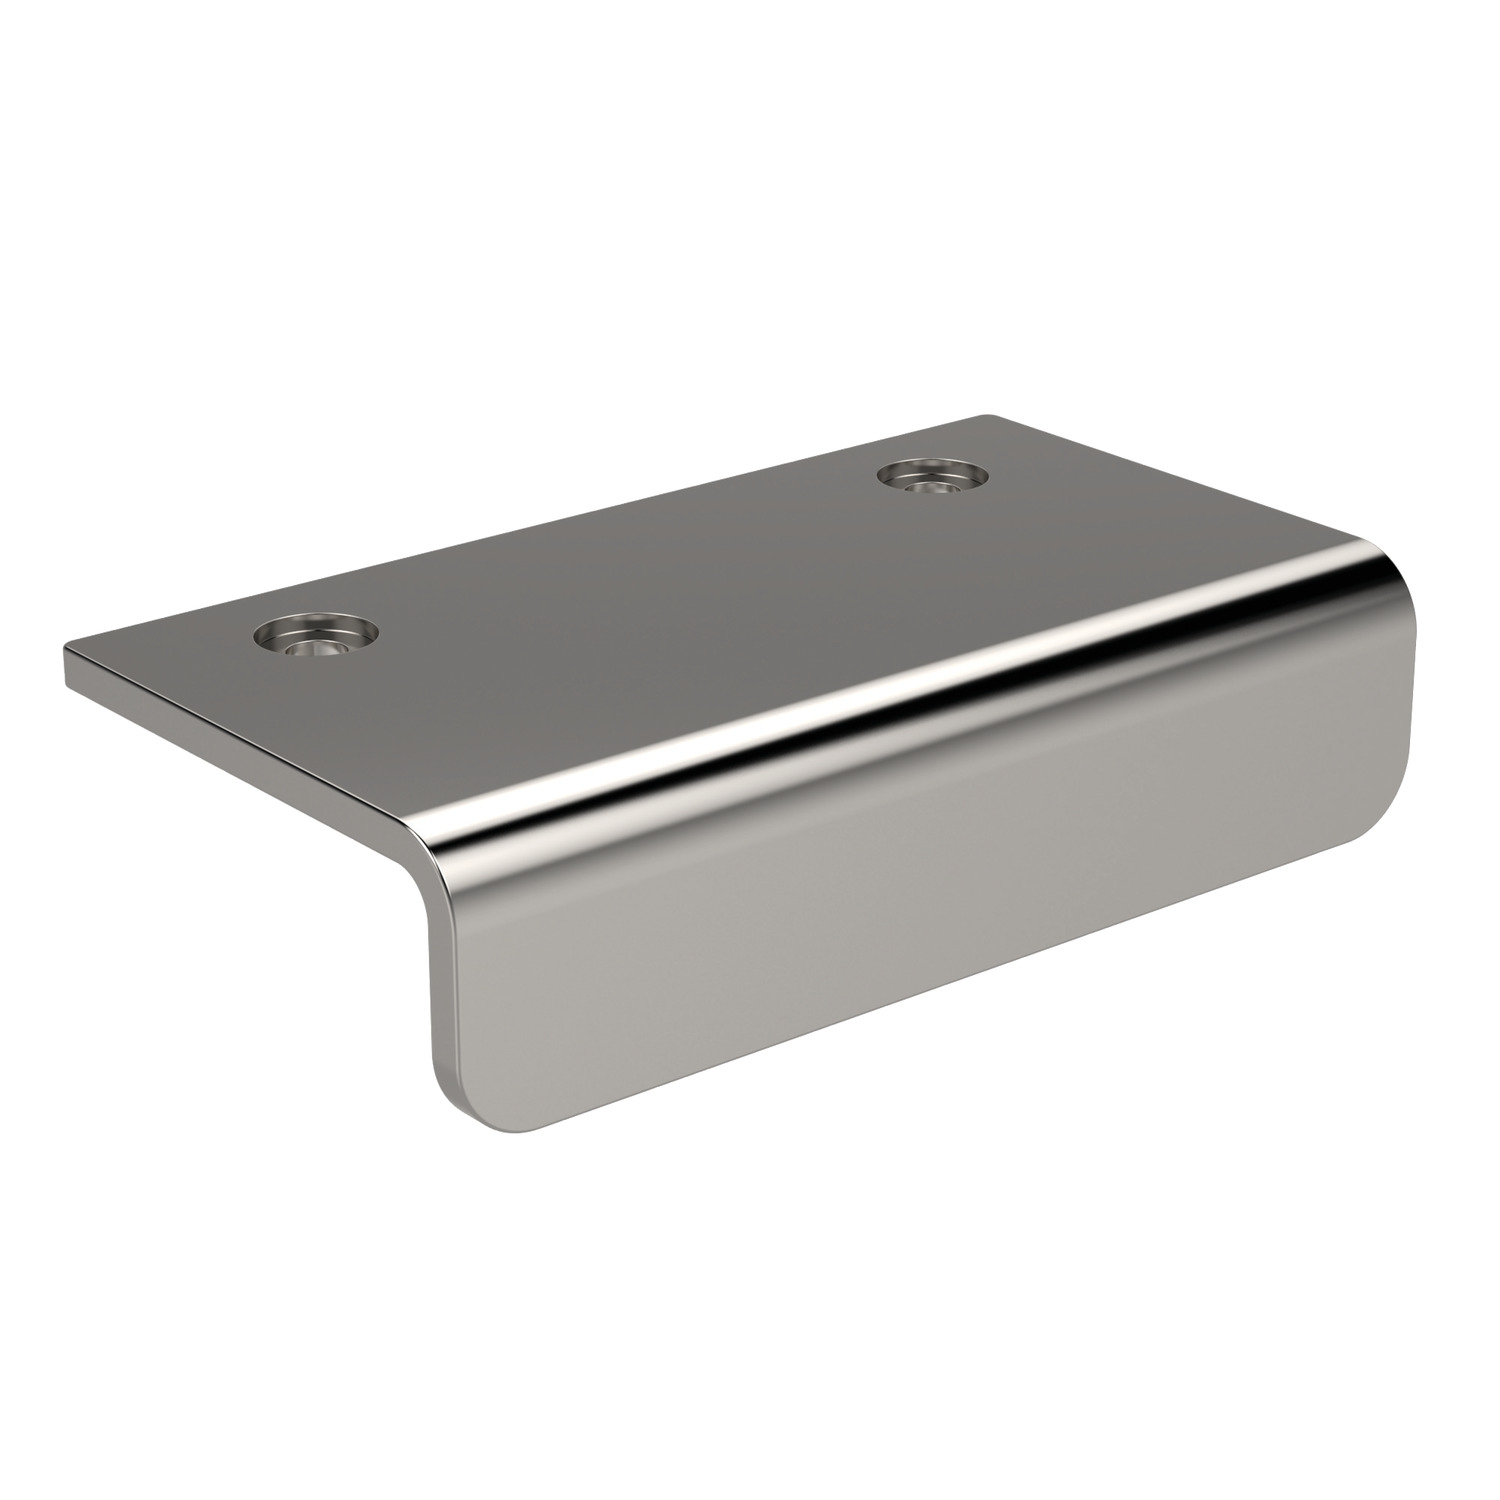 79590.W0095 Ledge Pulls Stainless Steel 95 - 38 - 18. Also known as U6100.AC0095